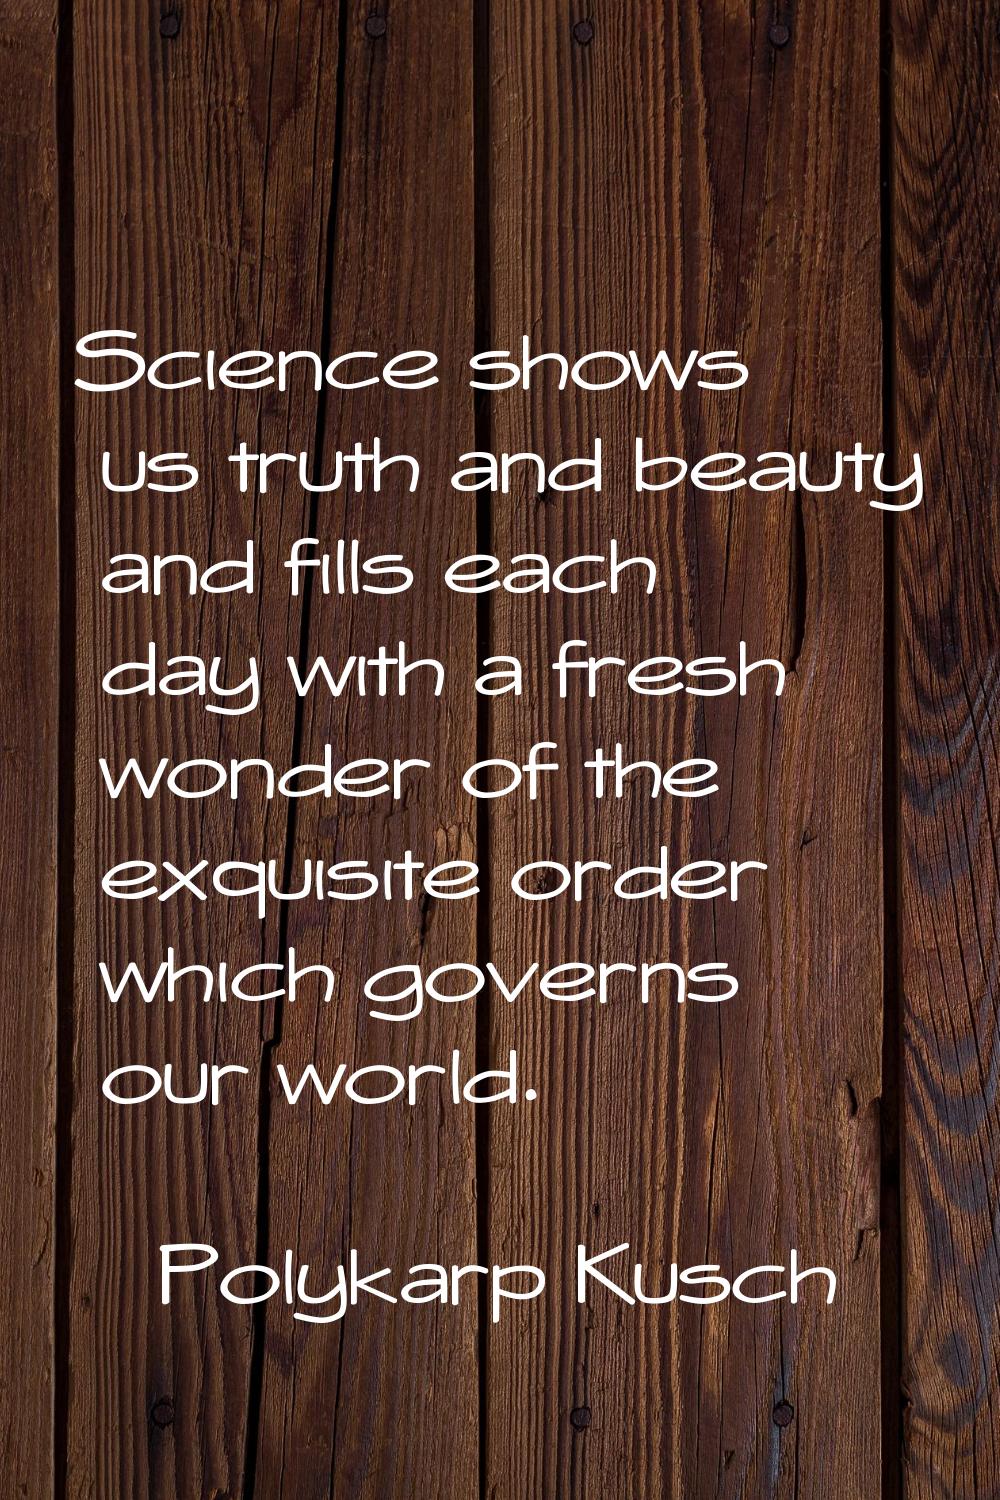 Science shows us truth and beauty and fills each day with a fresh wonder of the exquisite order whi